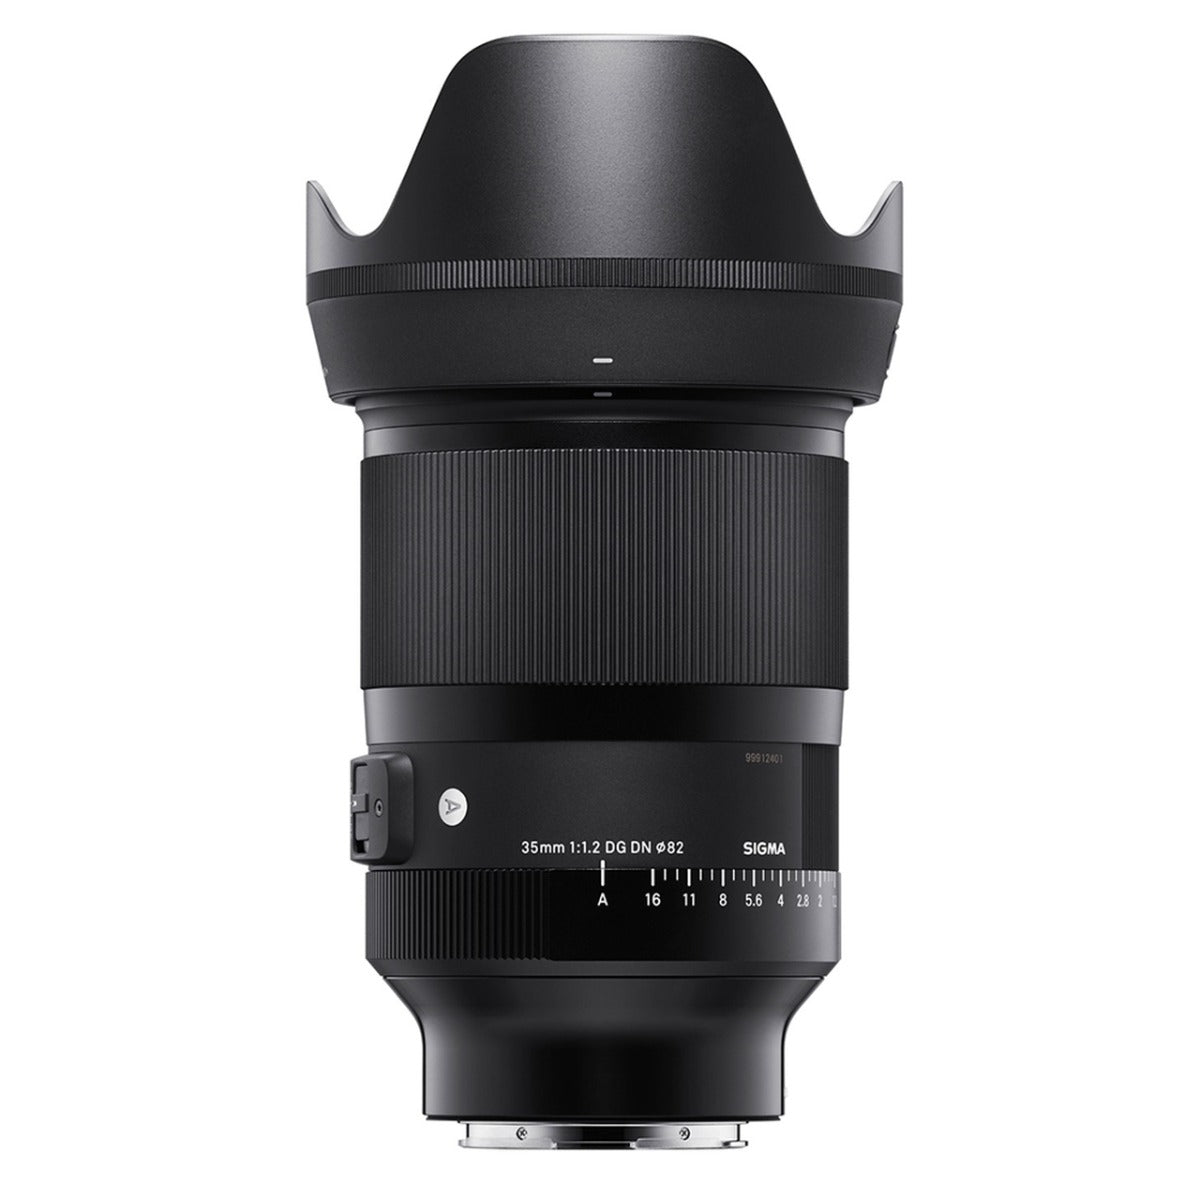 Product Image of Sigma 35mm f1.2 DG DN Art Lens - Sony E